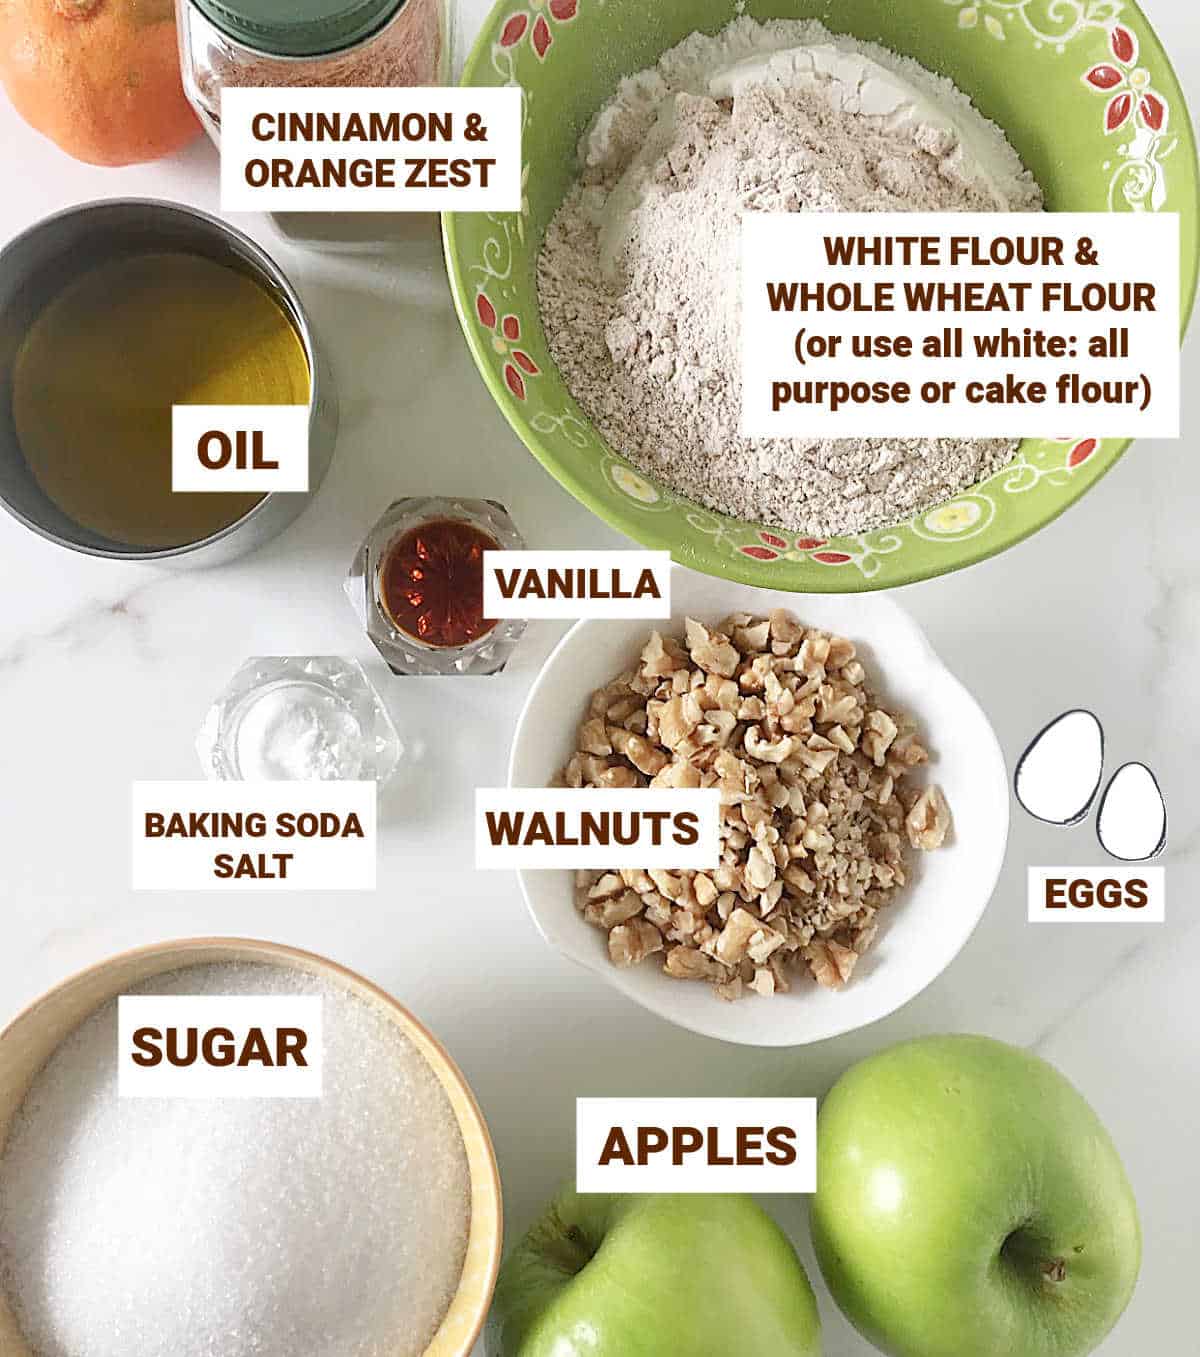 Ingredients for apple walnut cake in bowls on a white surface, including flours, sugar, oil, eggs, vanilla, cinnamon.